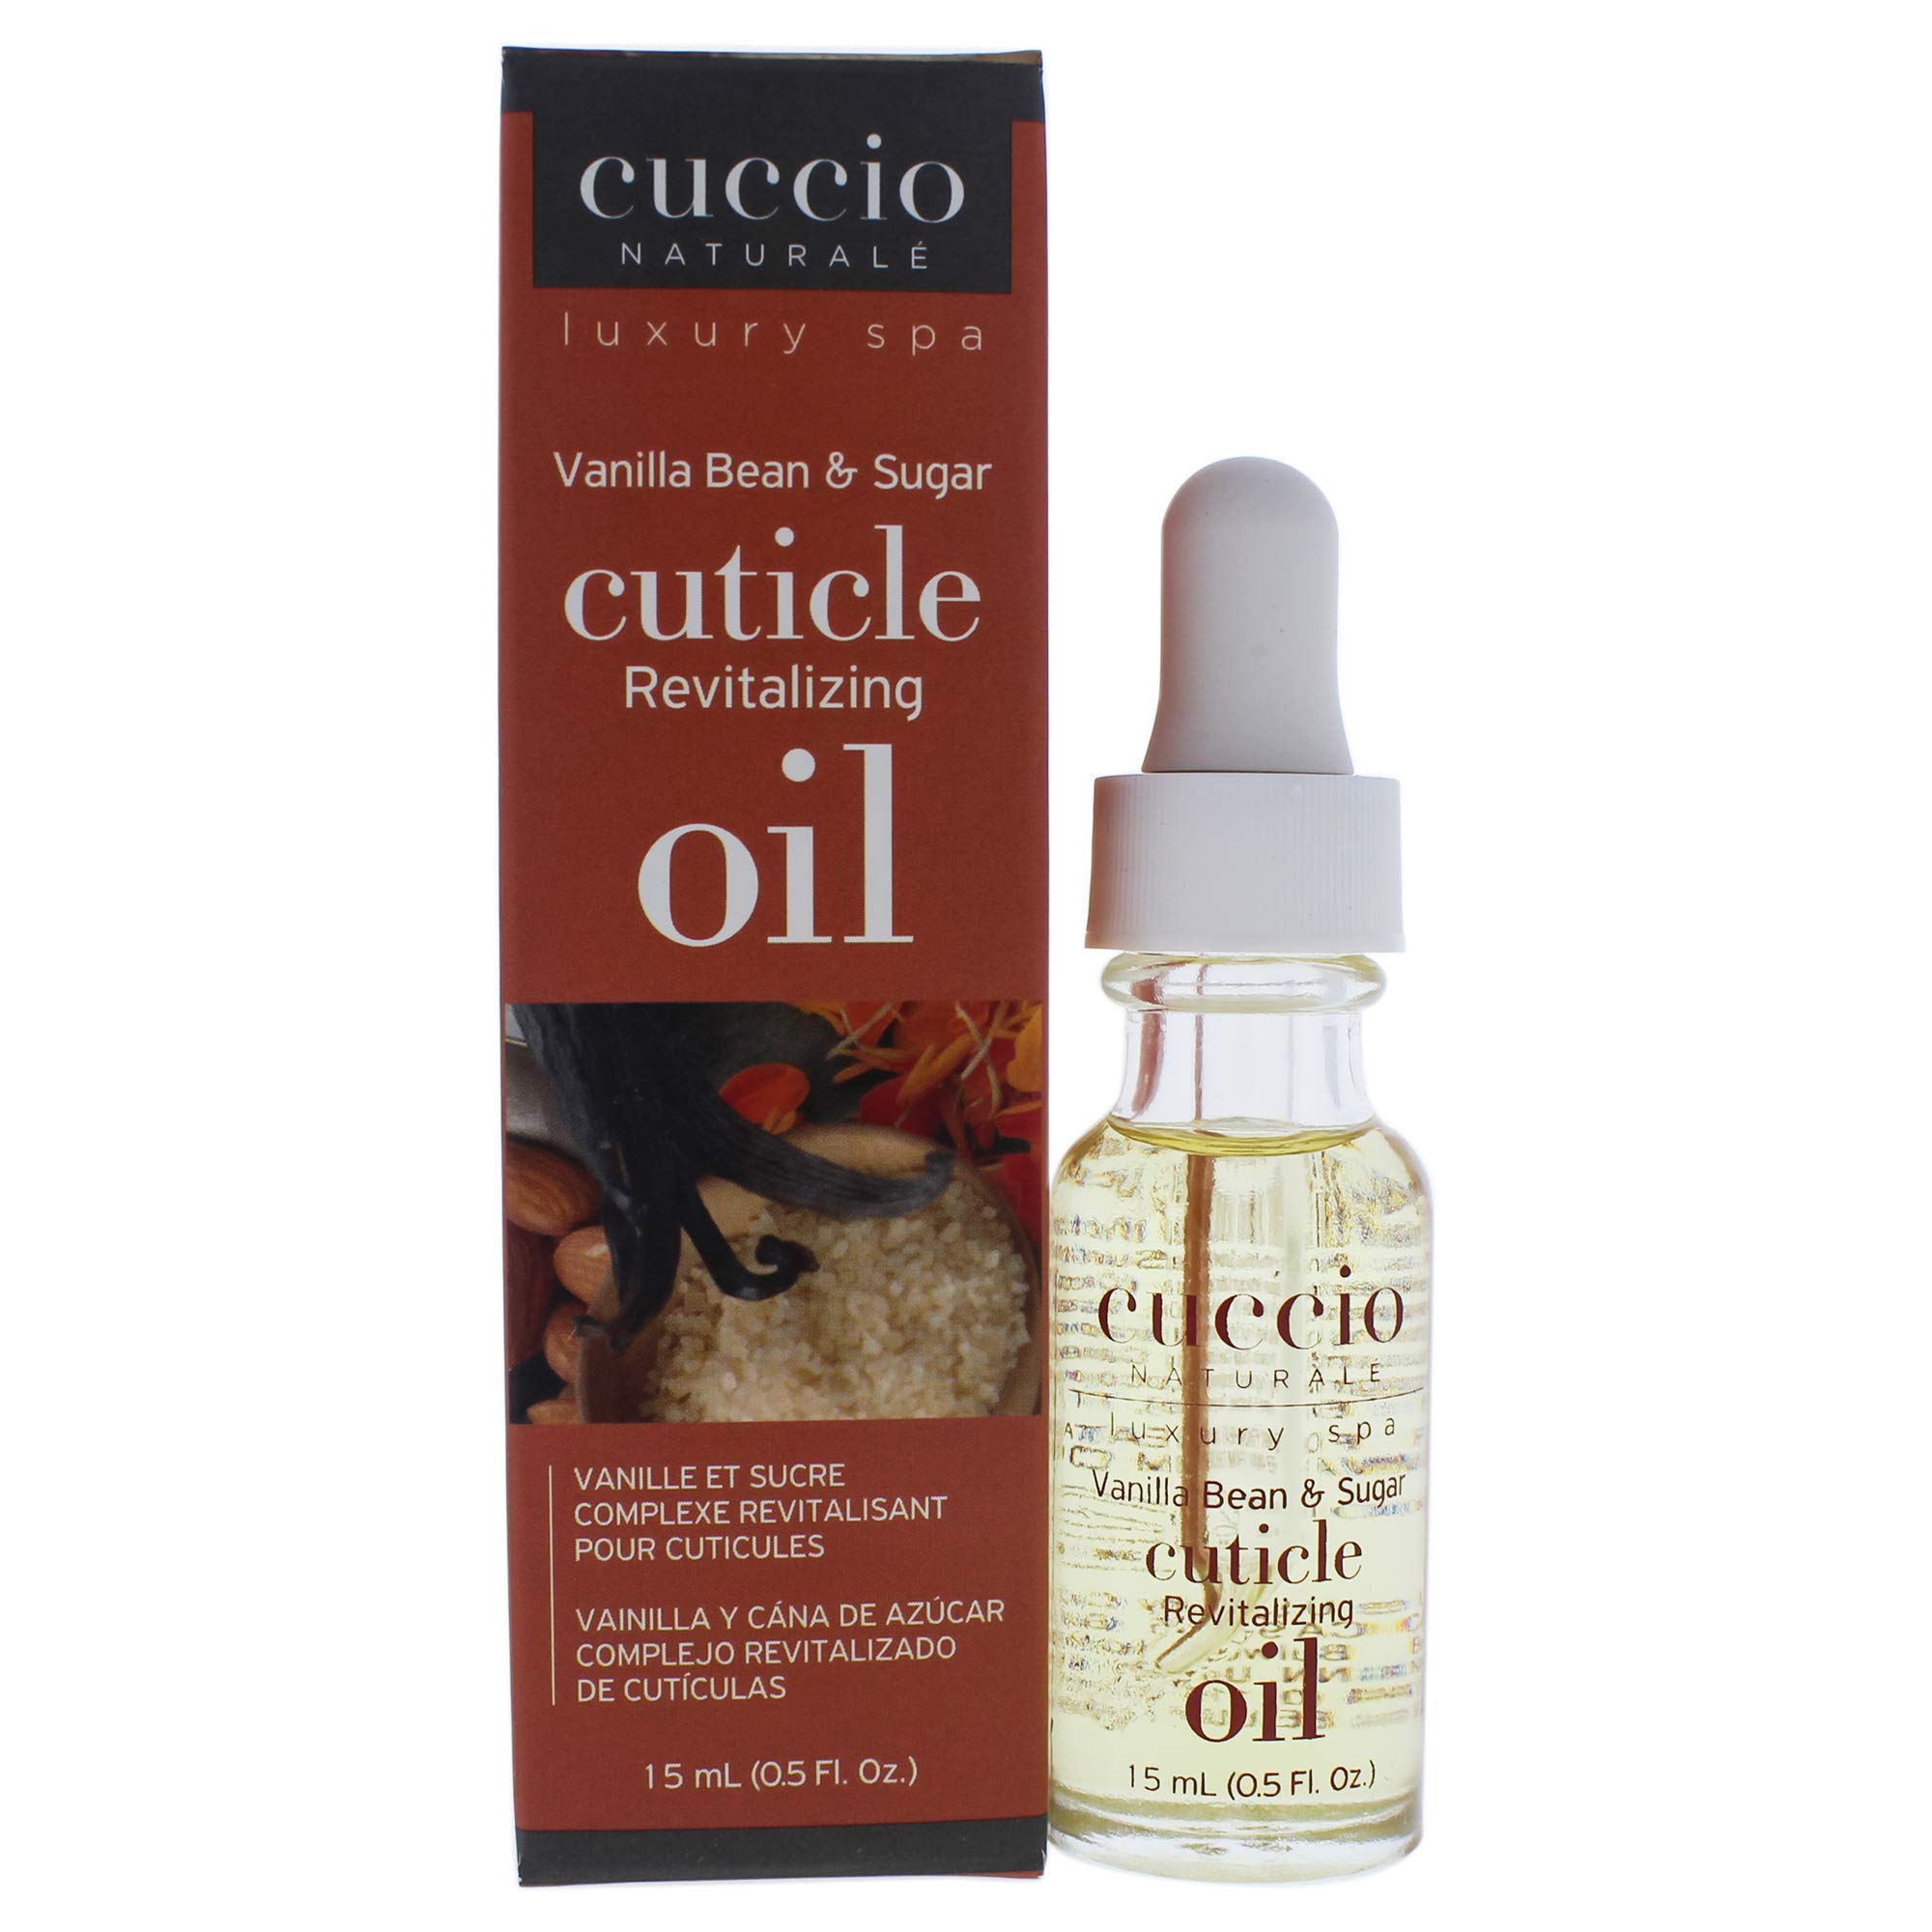 cuccio Naturale Revitalizing cuticle Oil - Hydrating Oil For Repaired cuticles Overnight - Remedy For Damaged Skin And Thin Nail